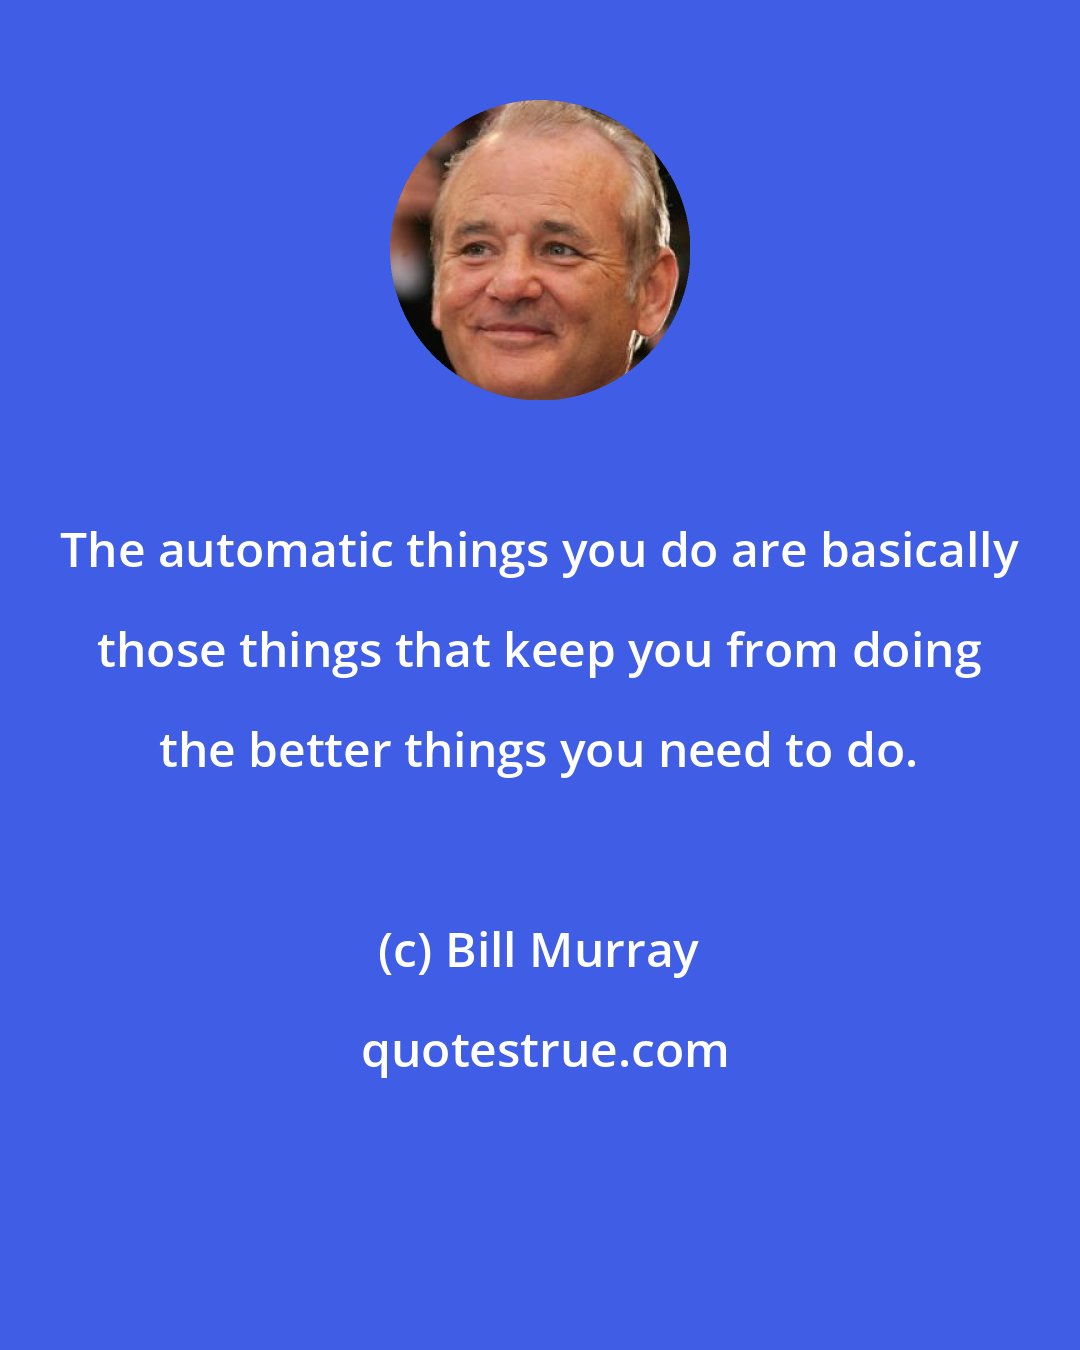 Bill Murray: The automatic things you do are basically those things that keep you from doing the better things you need to do.